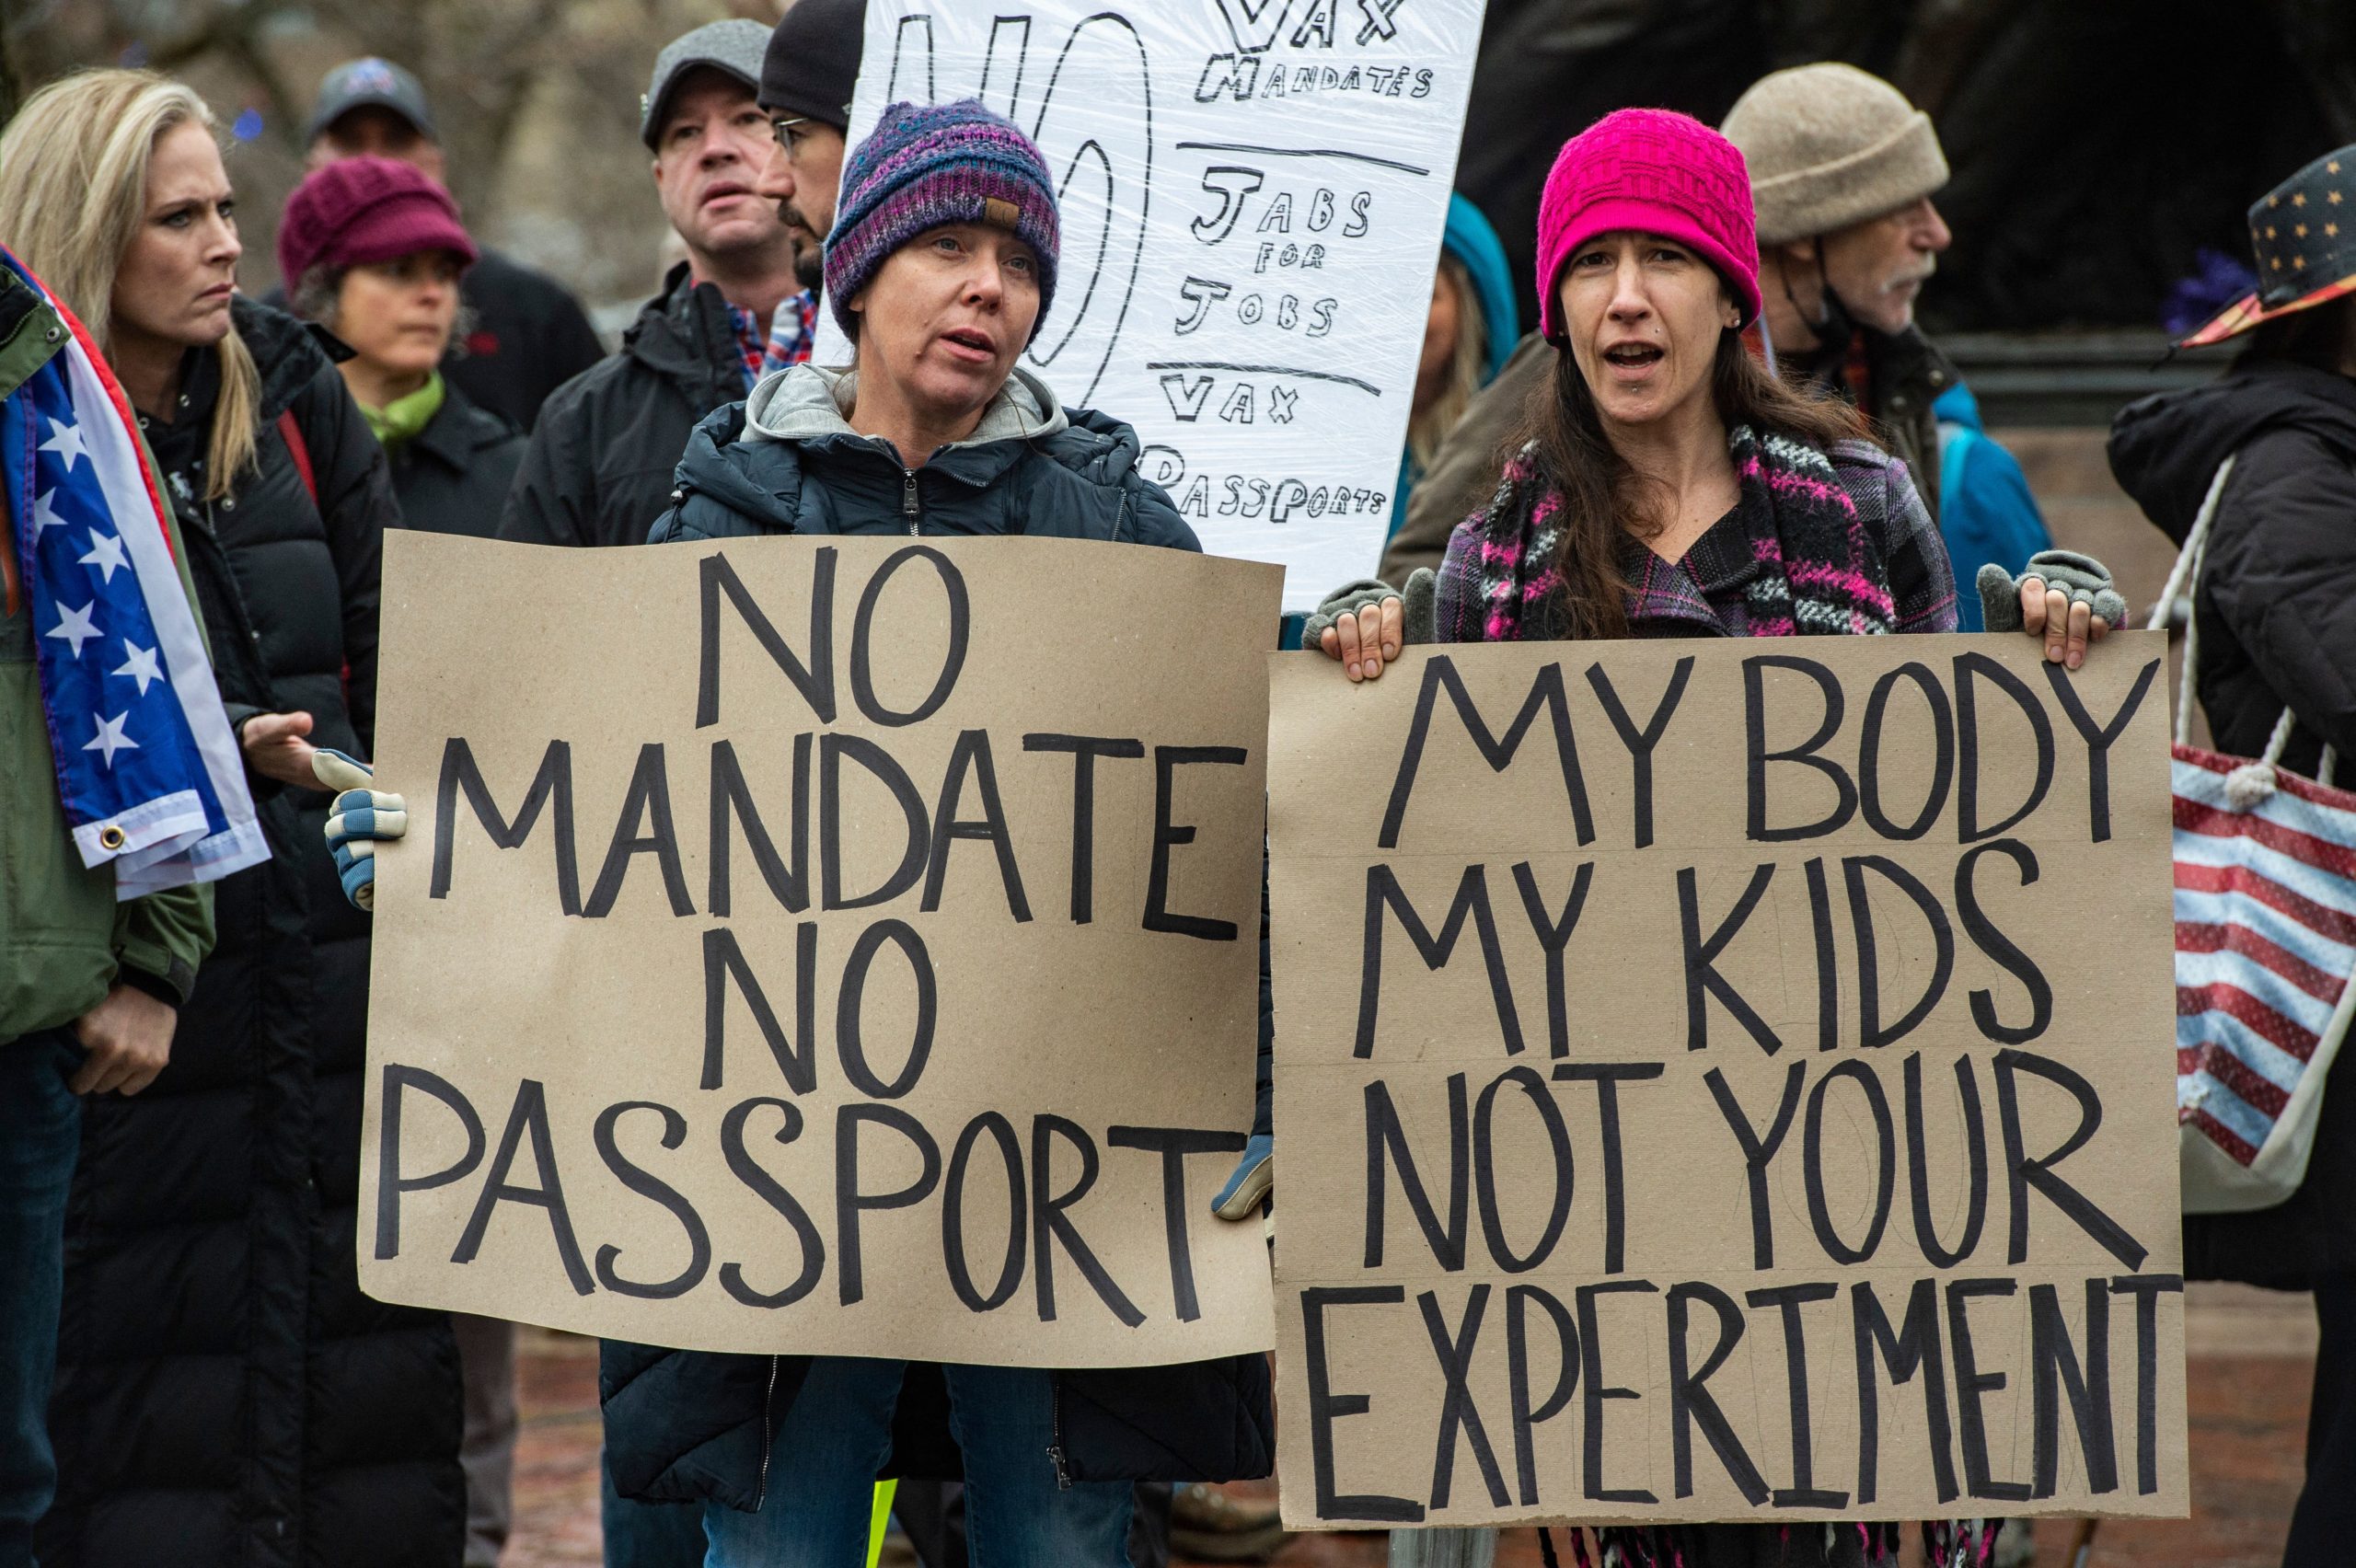 Demonstrators protest masks, vaccine mandates and vaccine passports, with some supporting vaccines, at the State House in Boston, Massachusetts on January 5, 2022.